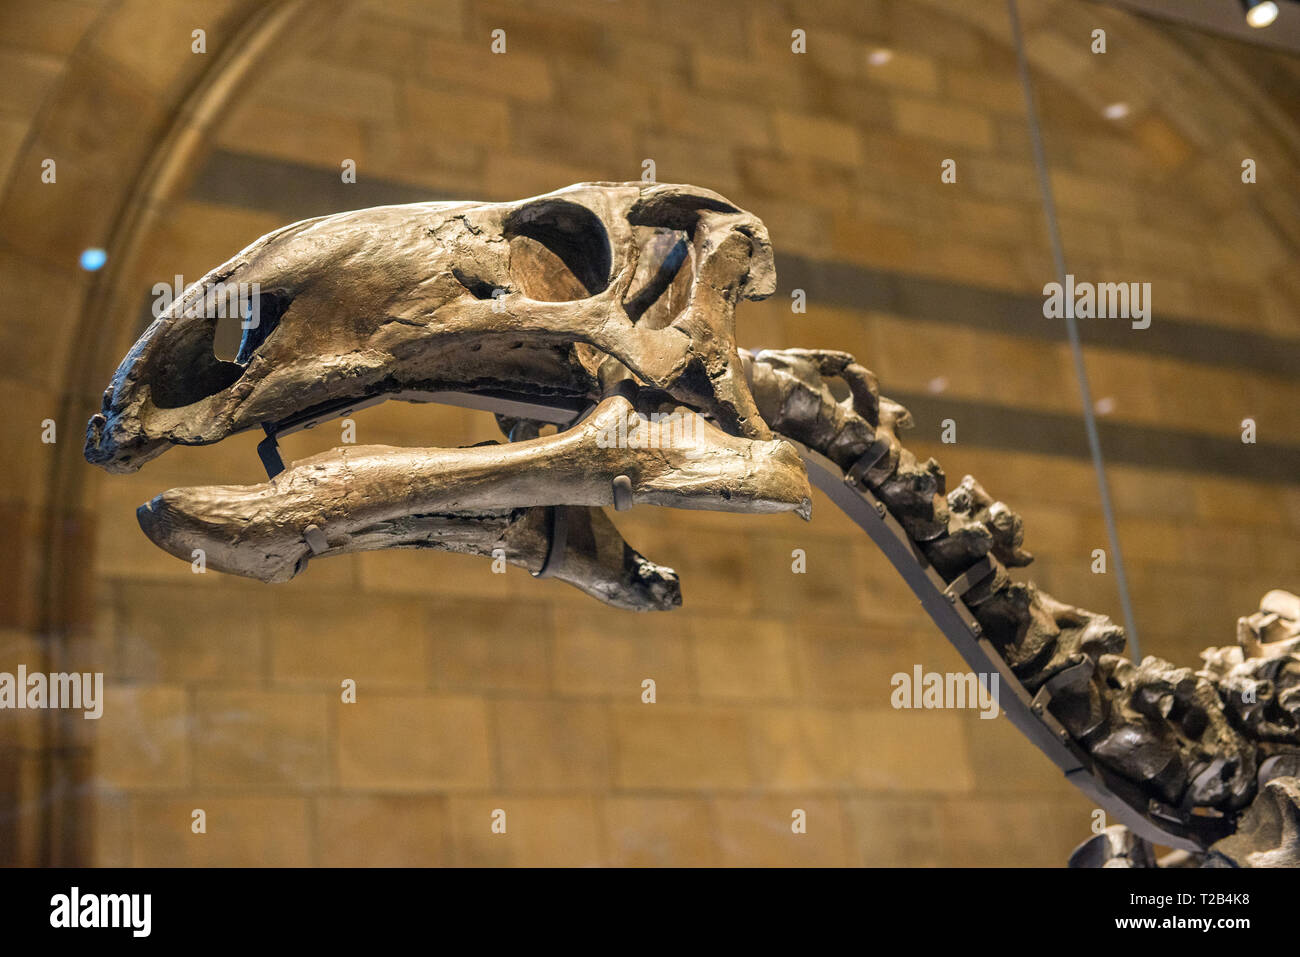 LONDON, UK - MARCH 22, 2019: Dinosaur (Mantellisaurus) exhibited in Natural History Museum is one of the most complete skeletons ever found in England Stock Photo